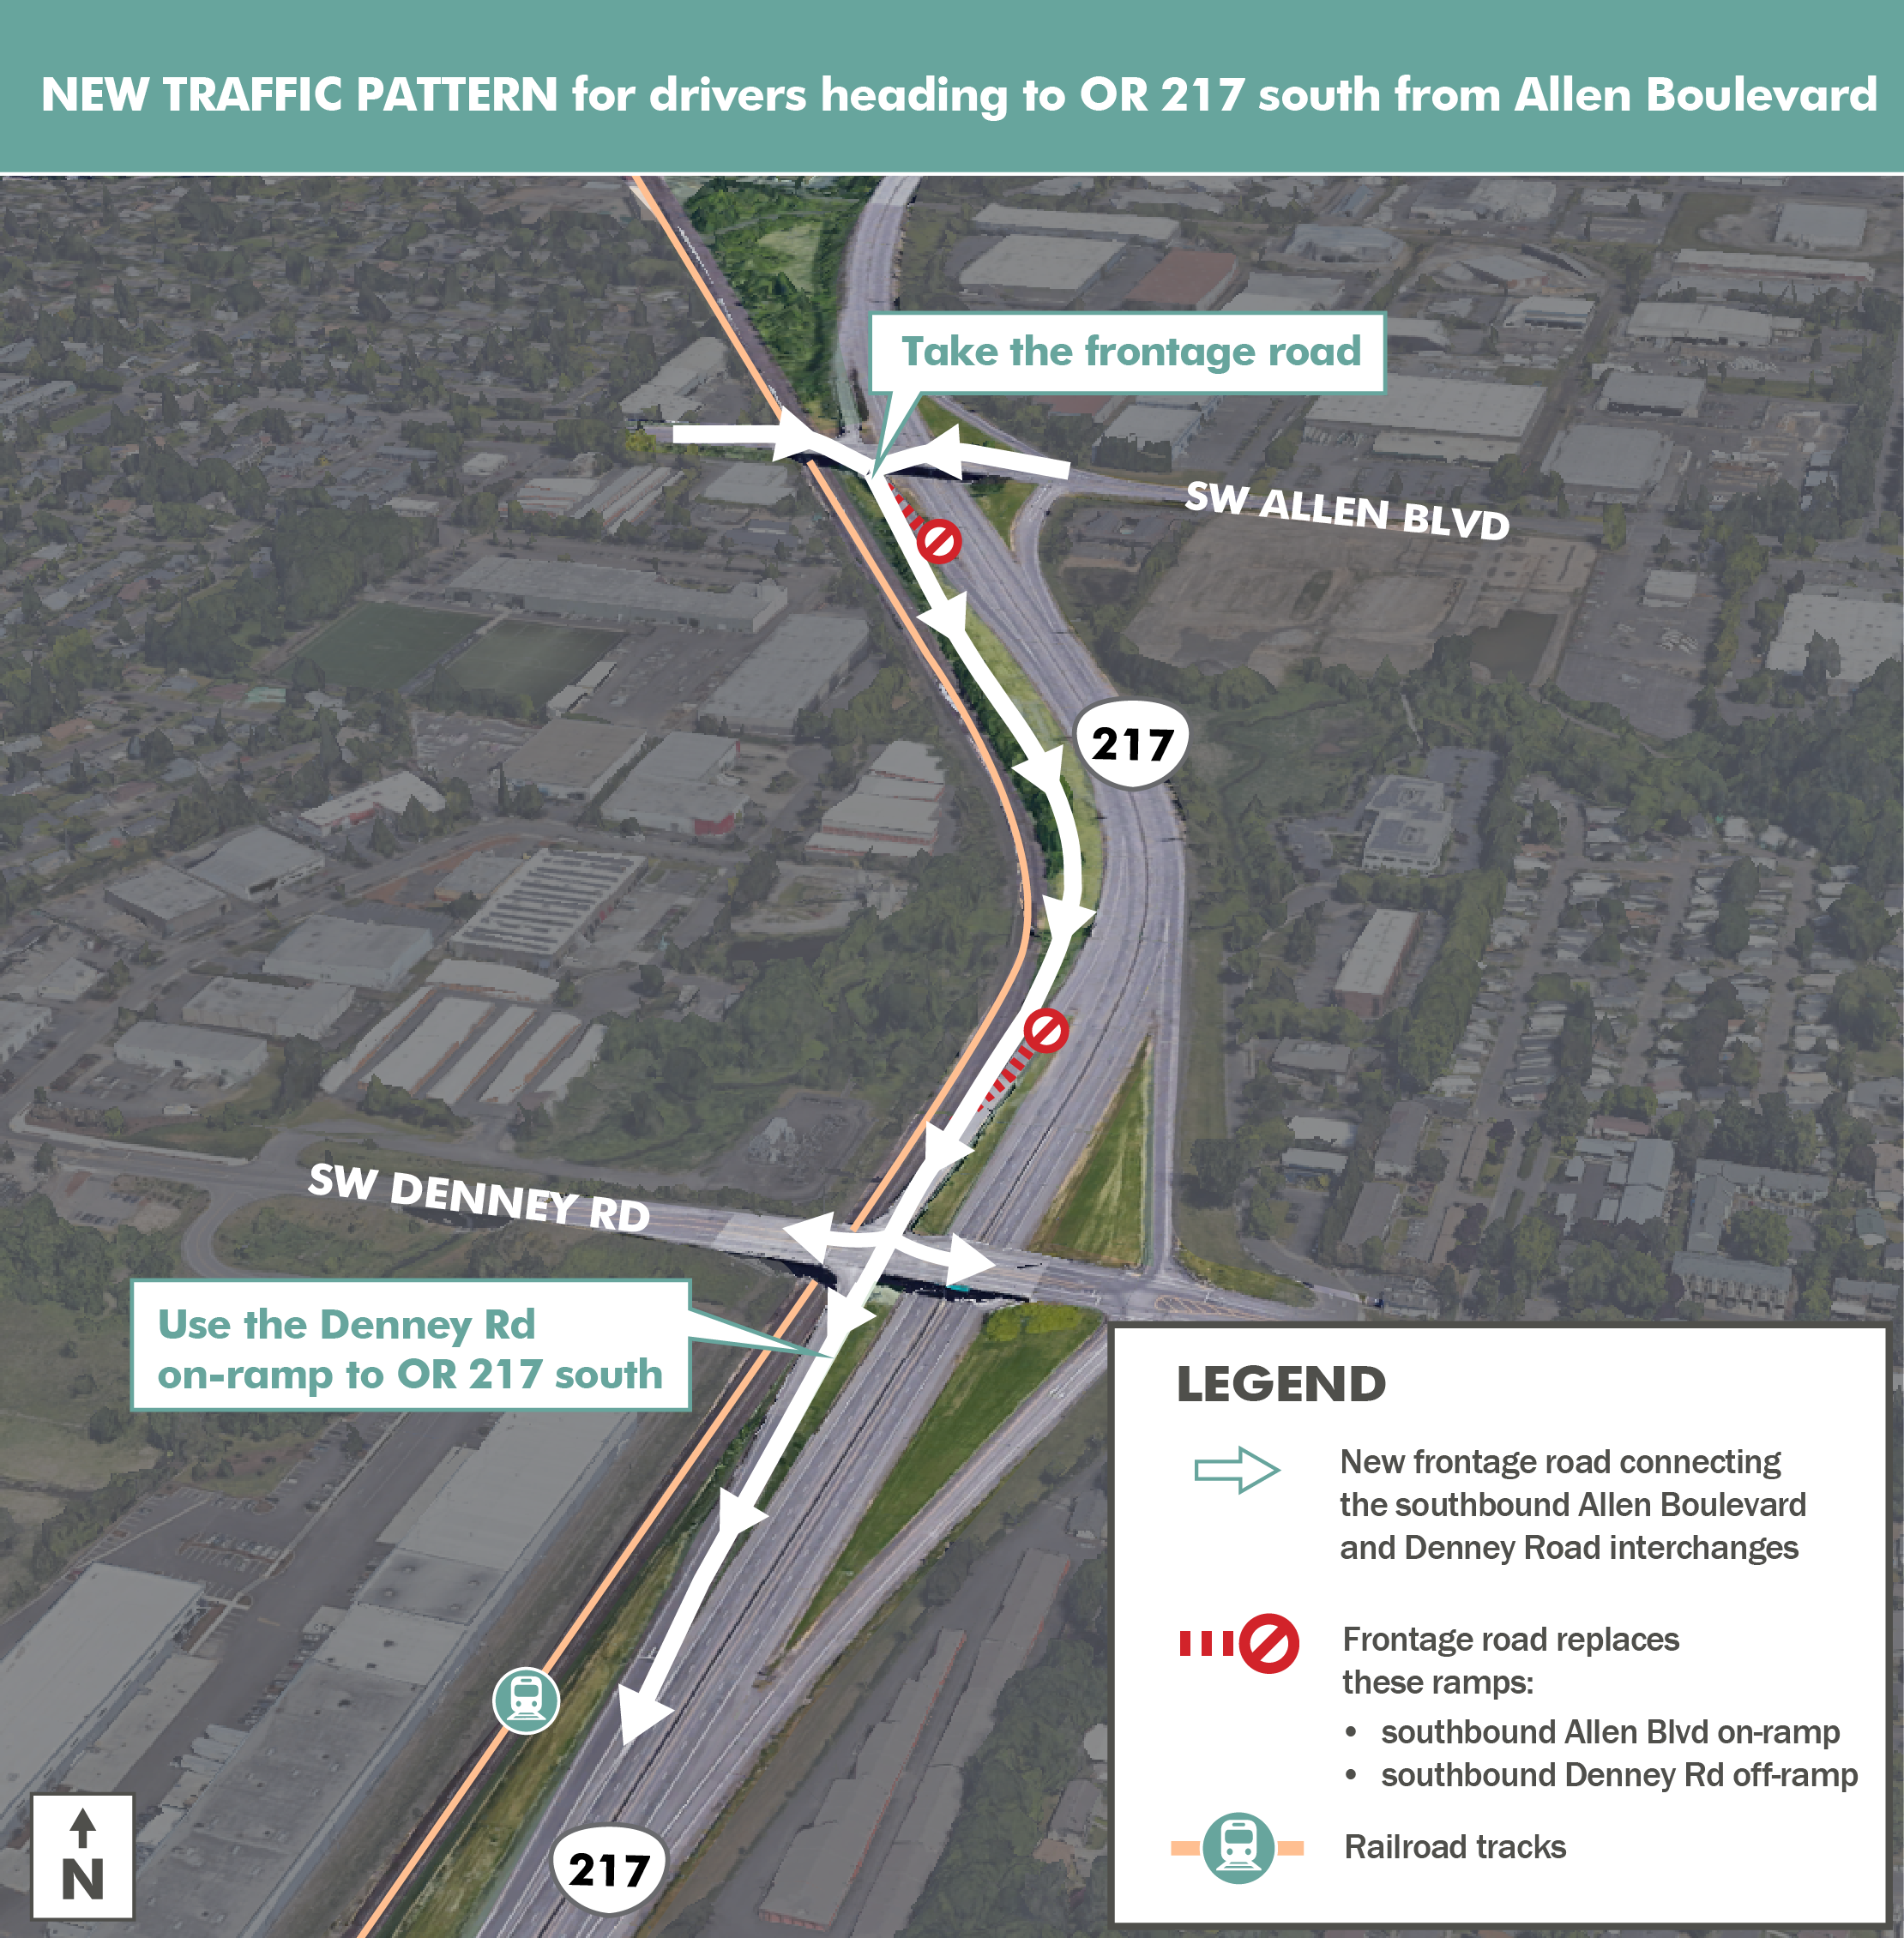 To get to OR 217 south from Allen Boulevard, use the new frontage road to get to the Denney Road on-ramp.png